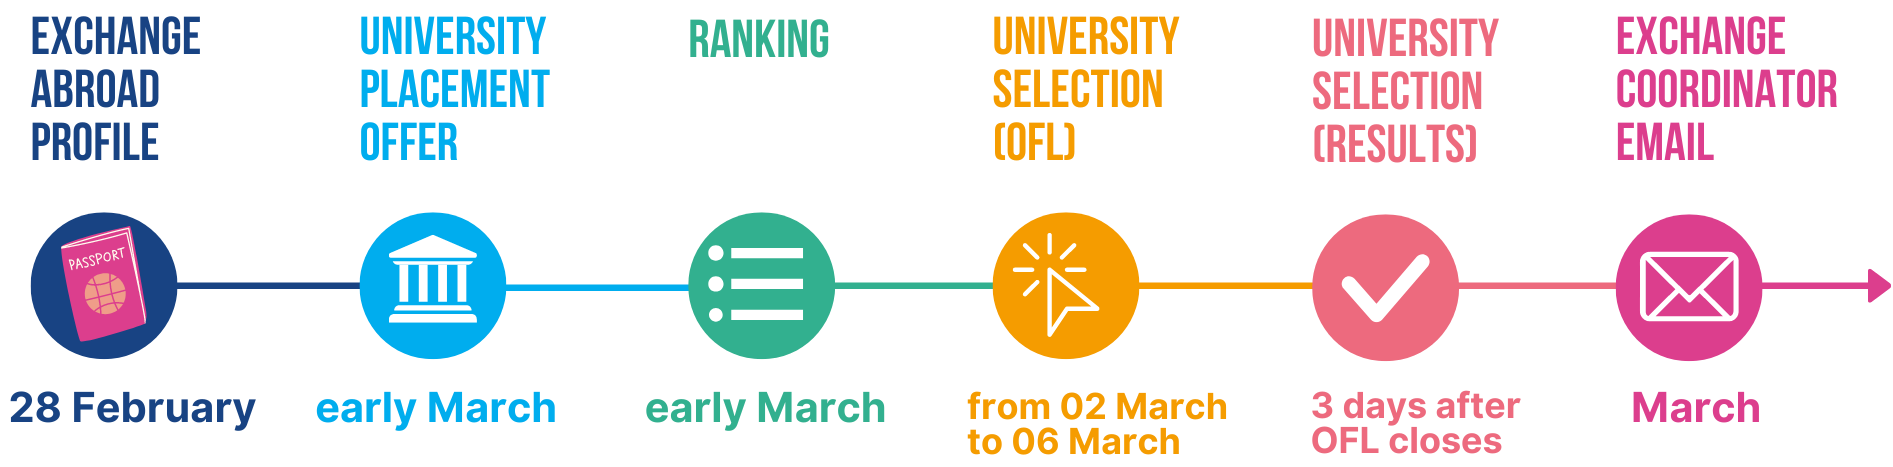 University_Selection_Timelines__3_.png